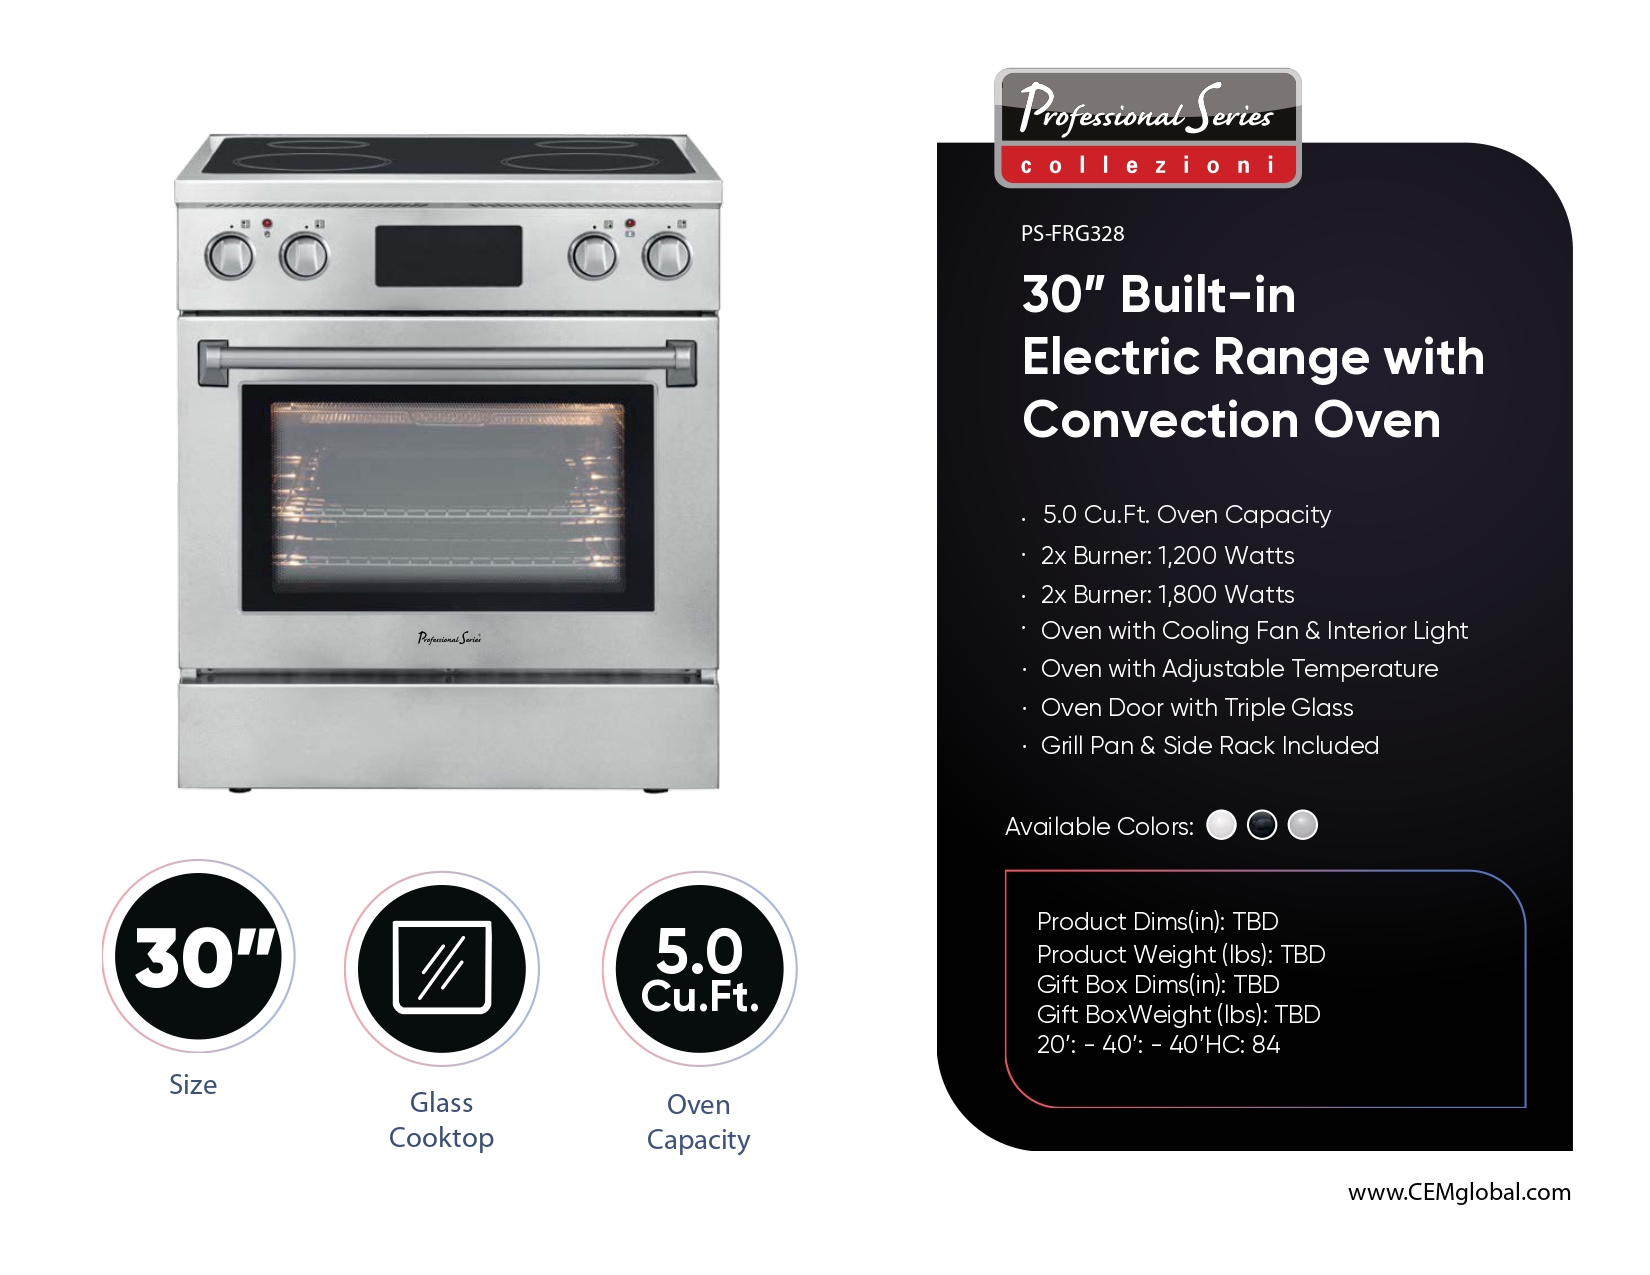 30” Built-in Electric Range with Convection Oven